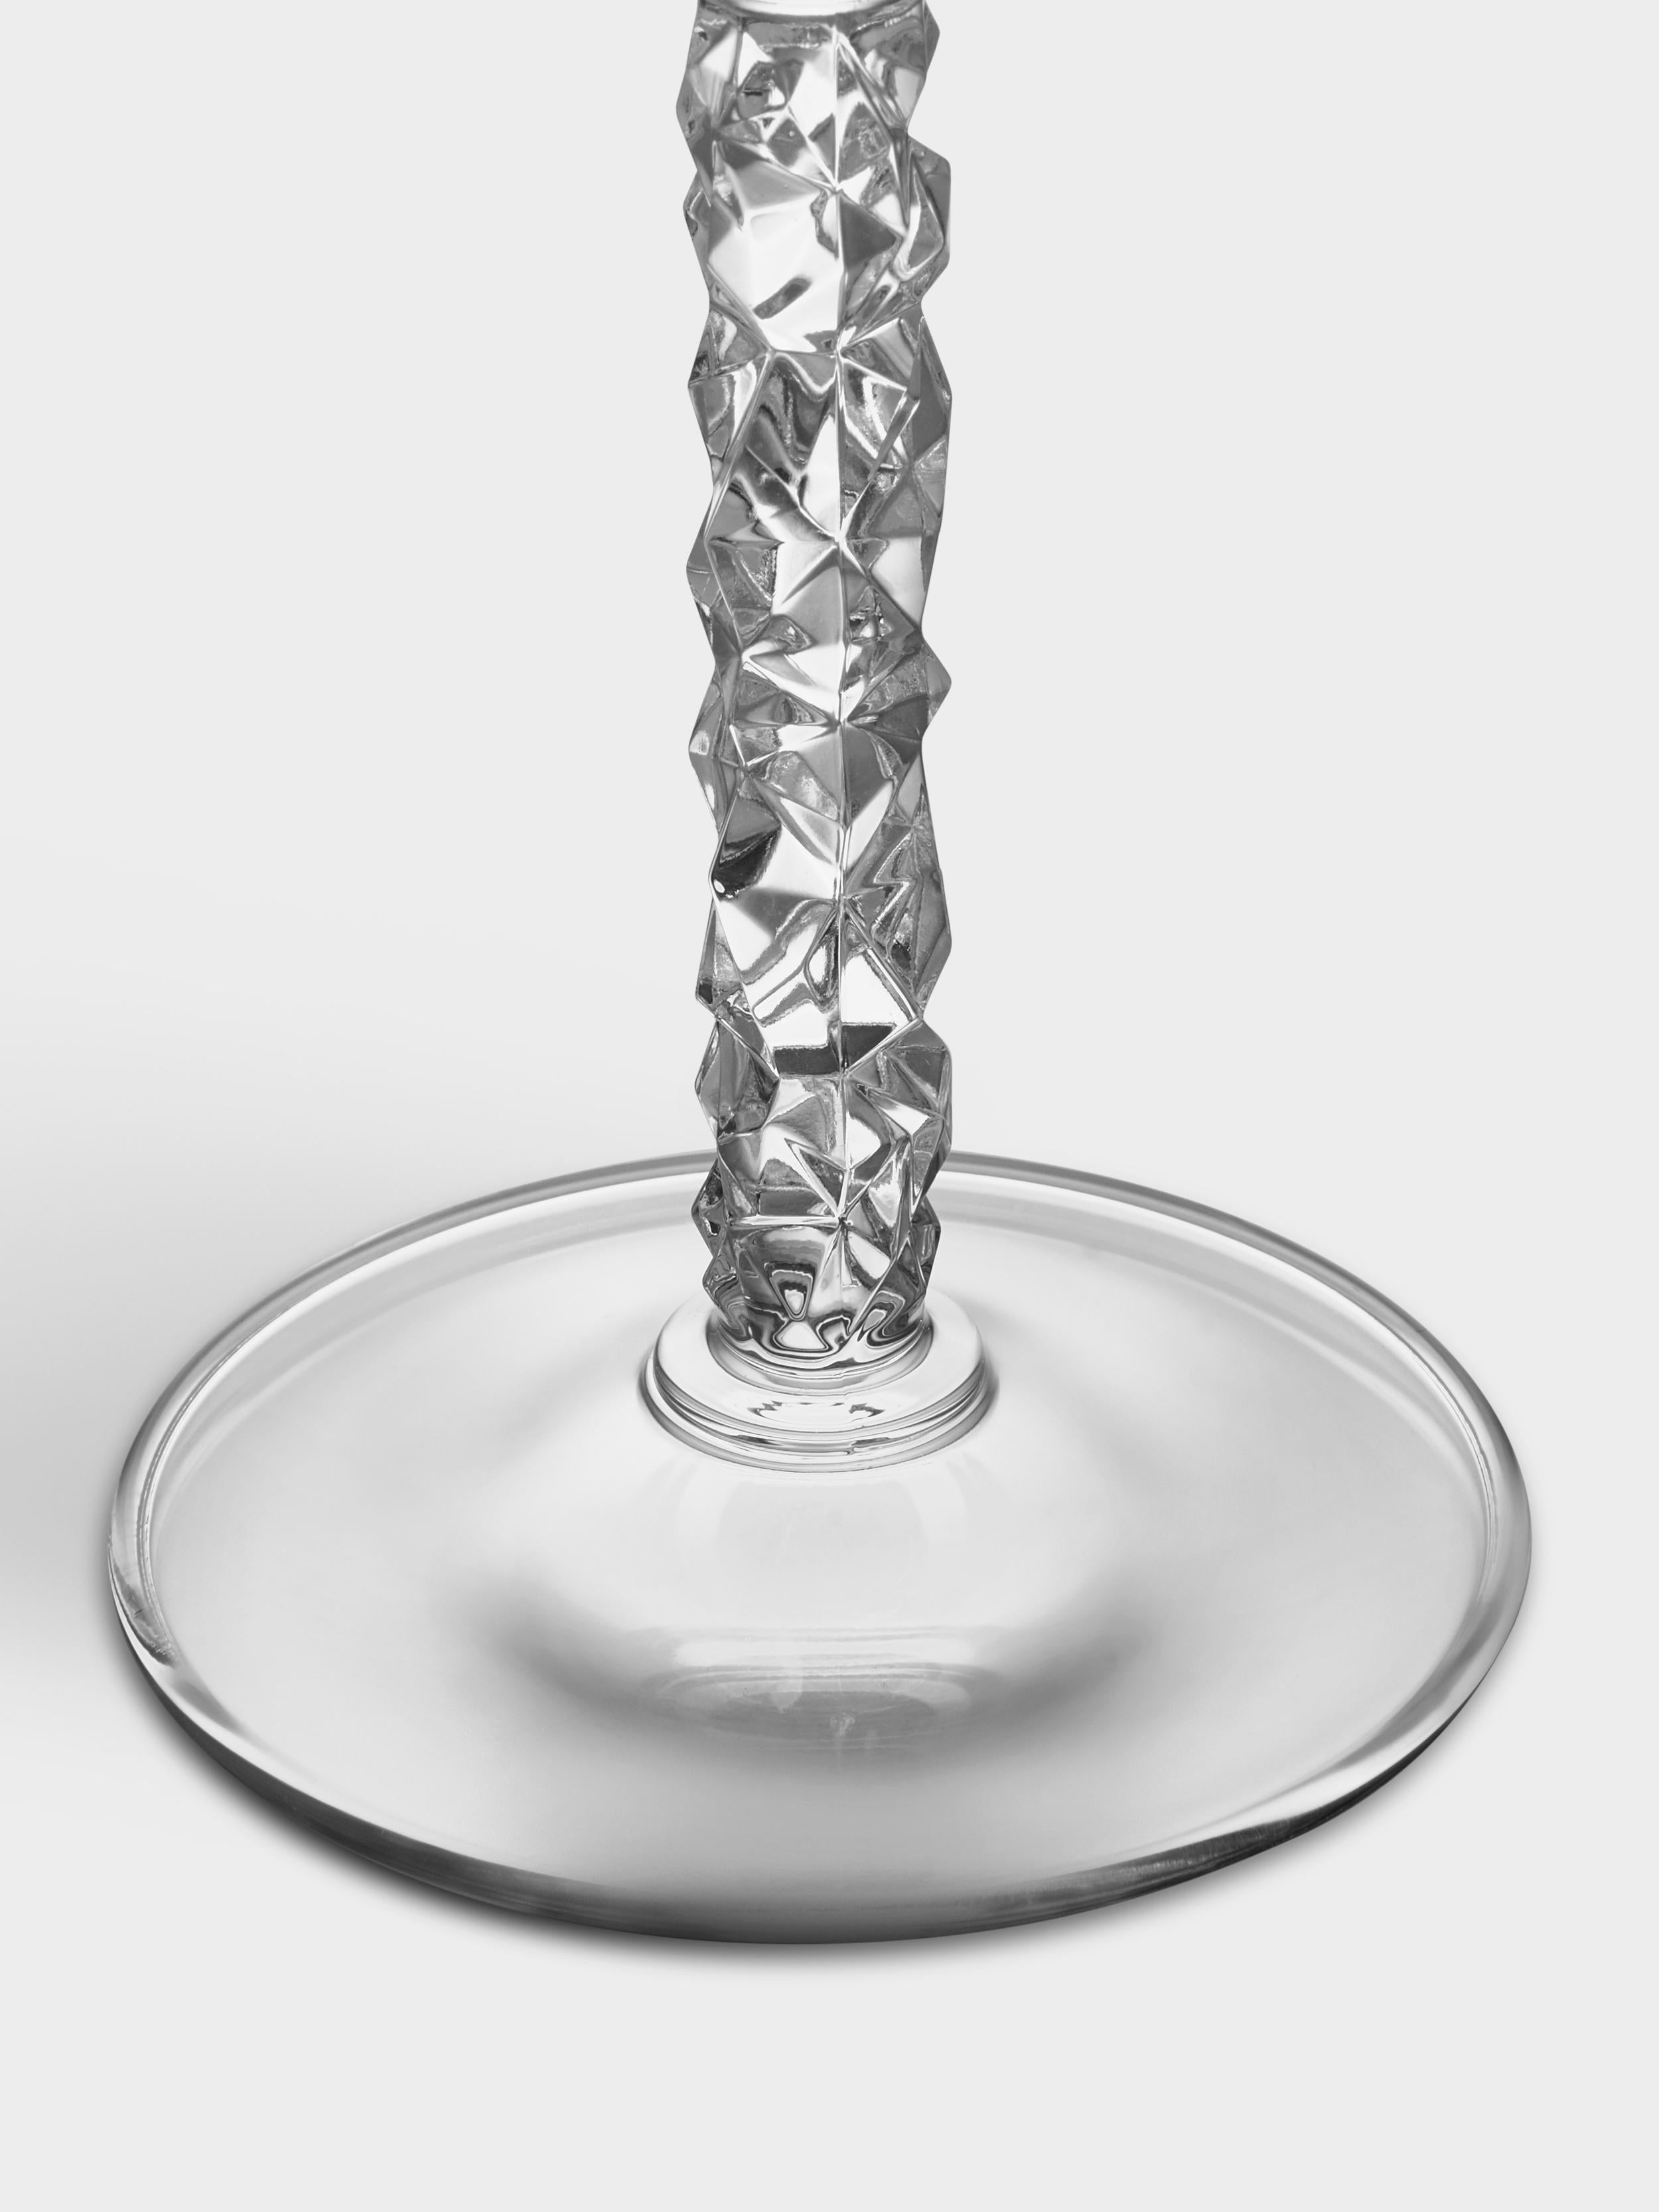 The Carat collection is based on a contemporary interpretation of the traditional cut glass for which Orrefors is world-renowned. Carat Coupe has a stem covered with the collection’s characteristic asymmetrical motif, which produces beautiful